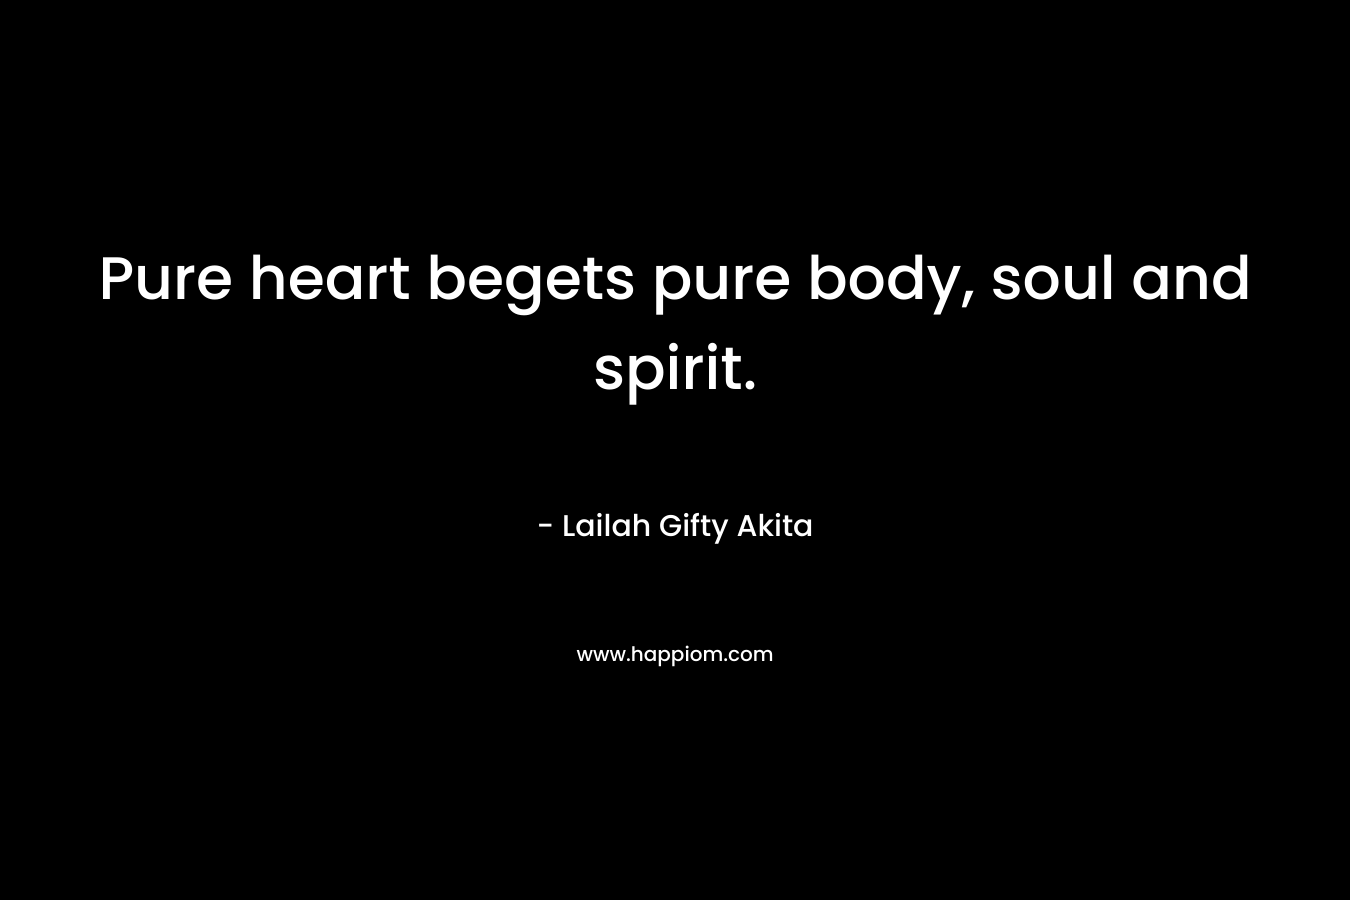 Pure heart begets pure body, soul and spirit. – Lailah Gifty Akita